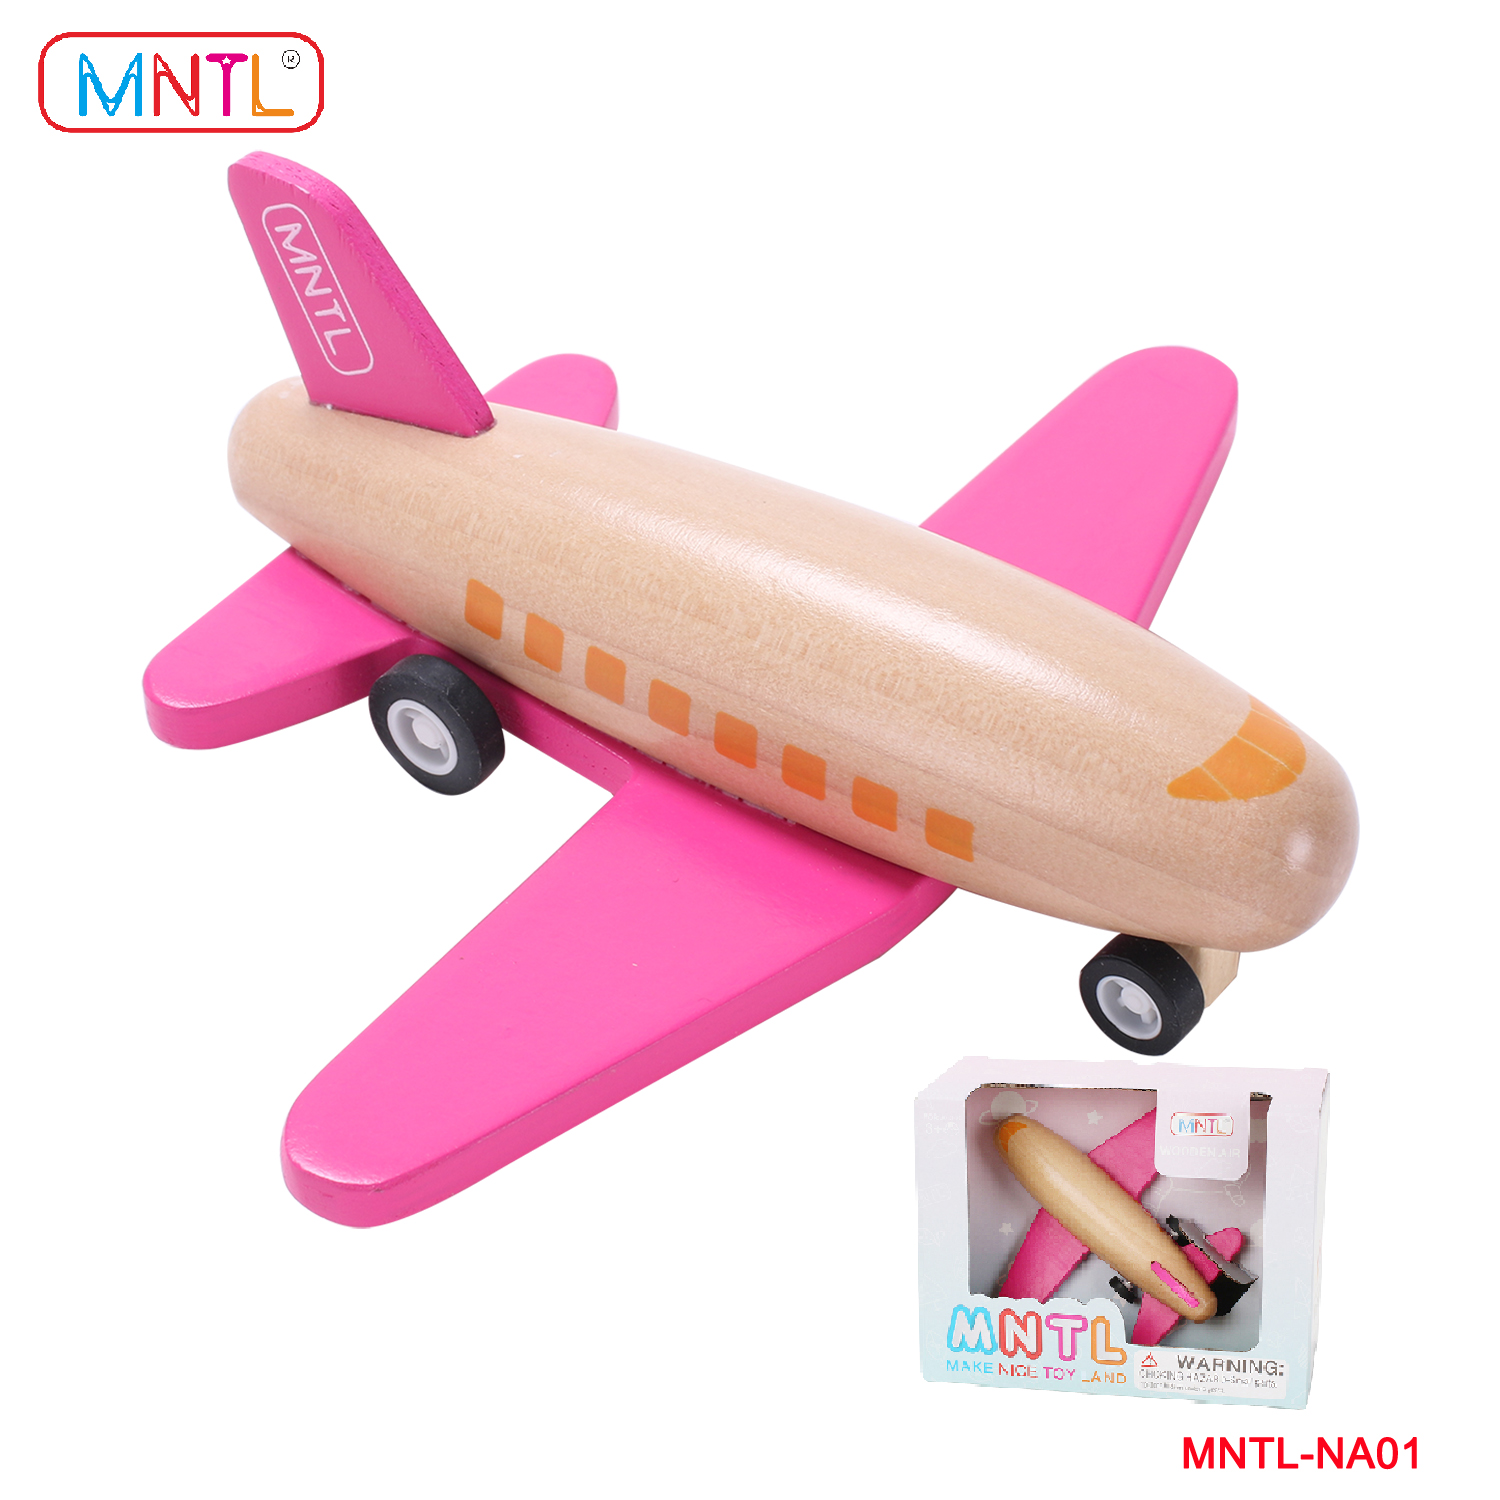 MNTL Wooden Airplane Toys STEM Pull Back Go Plane Model Friction Powered Helicopter Aircraft Kids Toddlers Boy Baby Girl Gift alx